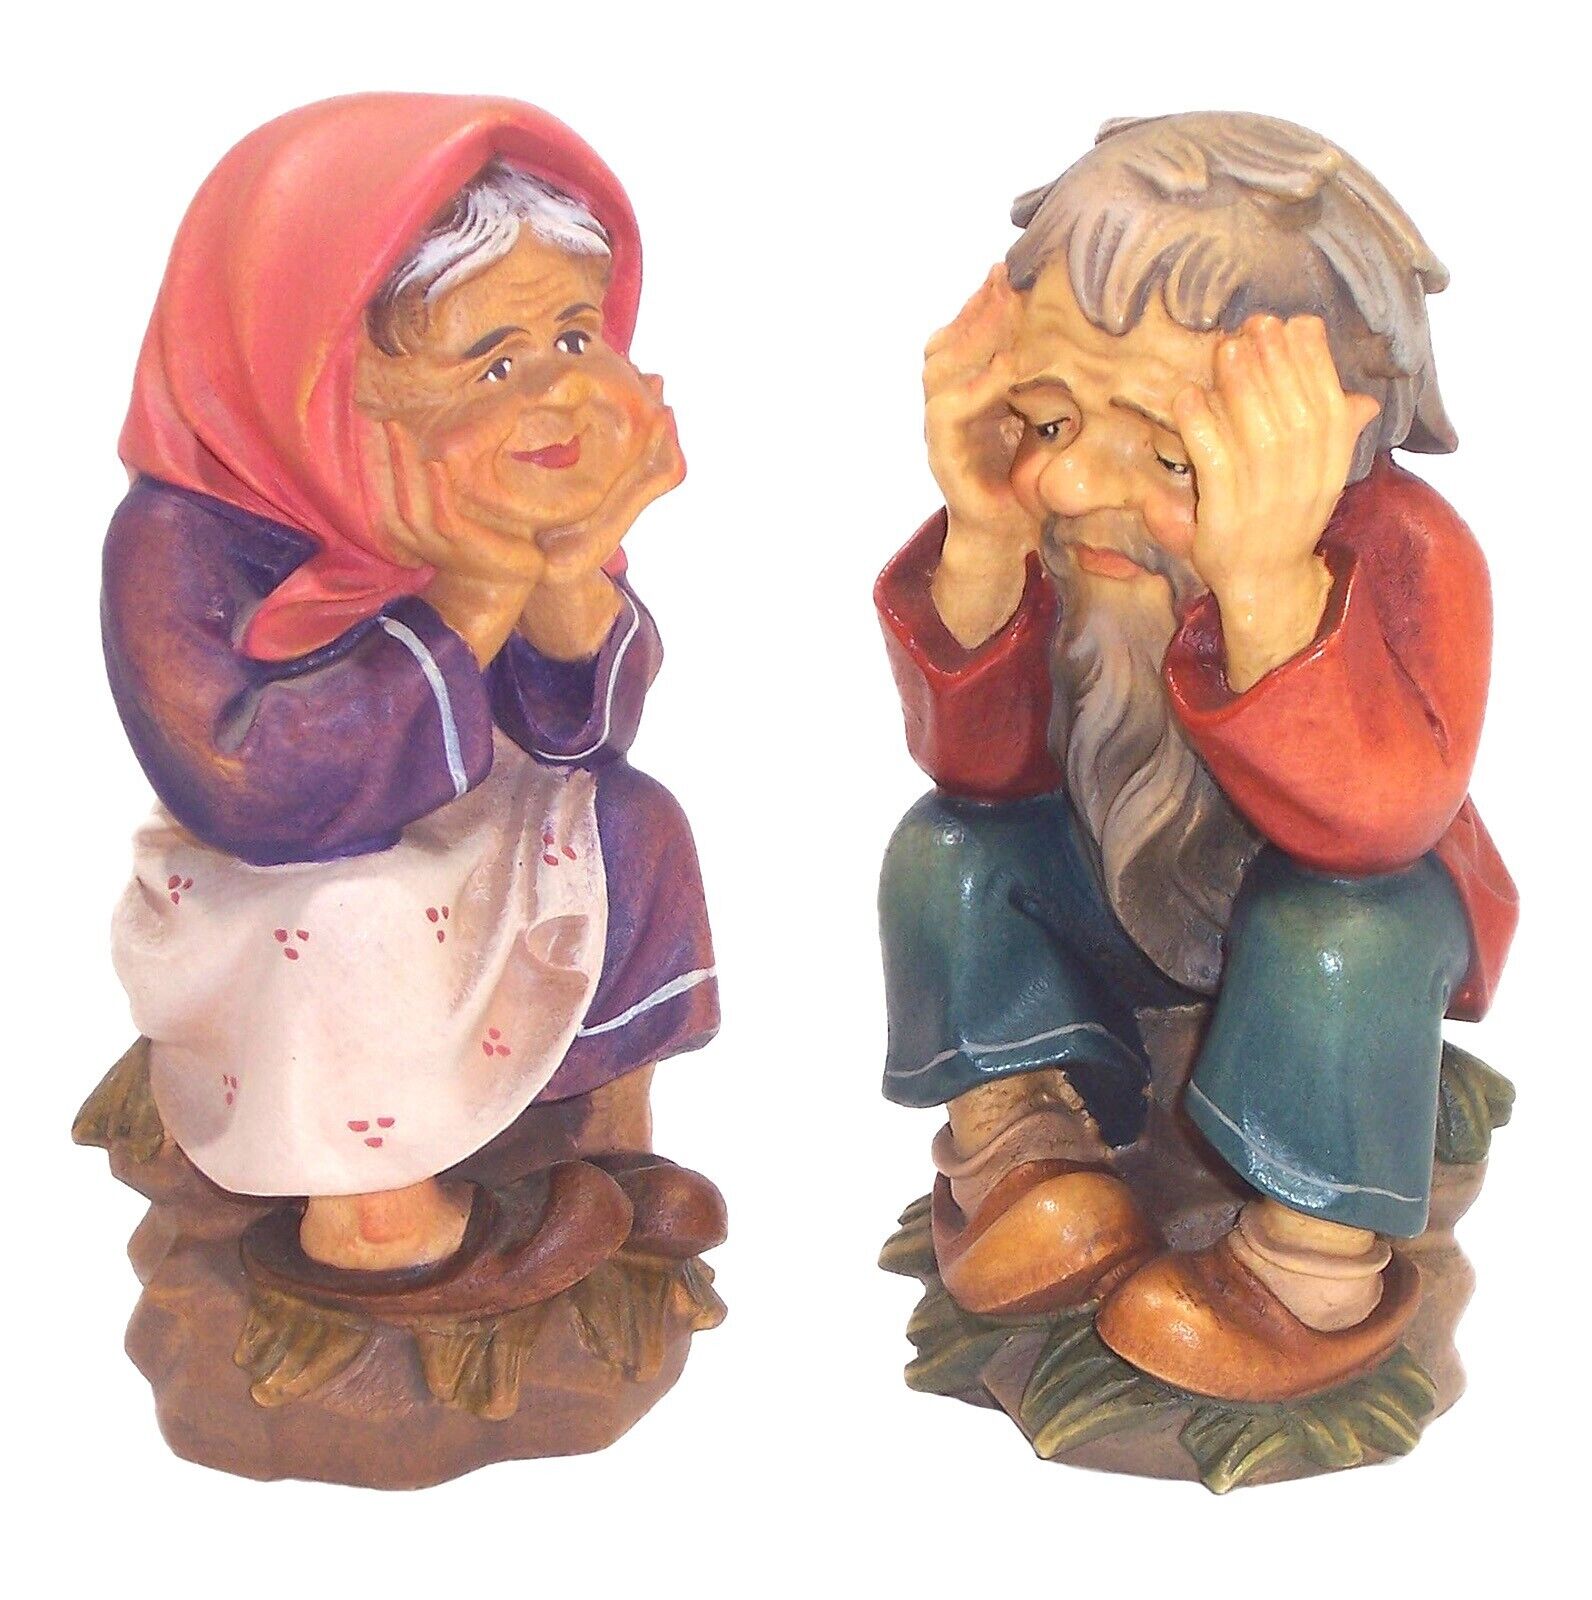 Pair of Hand Carved Figurines, Old Married Couple, Oberammergau, 5.75” Tall